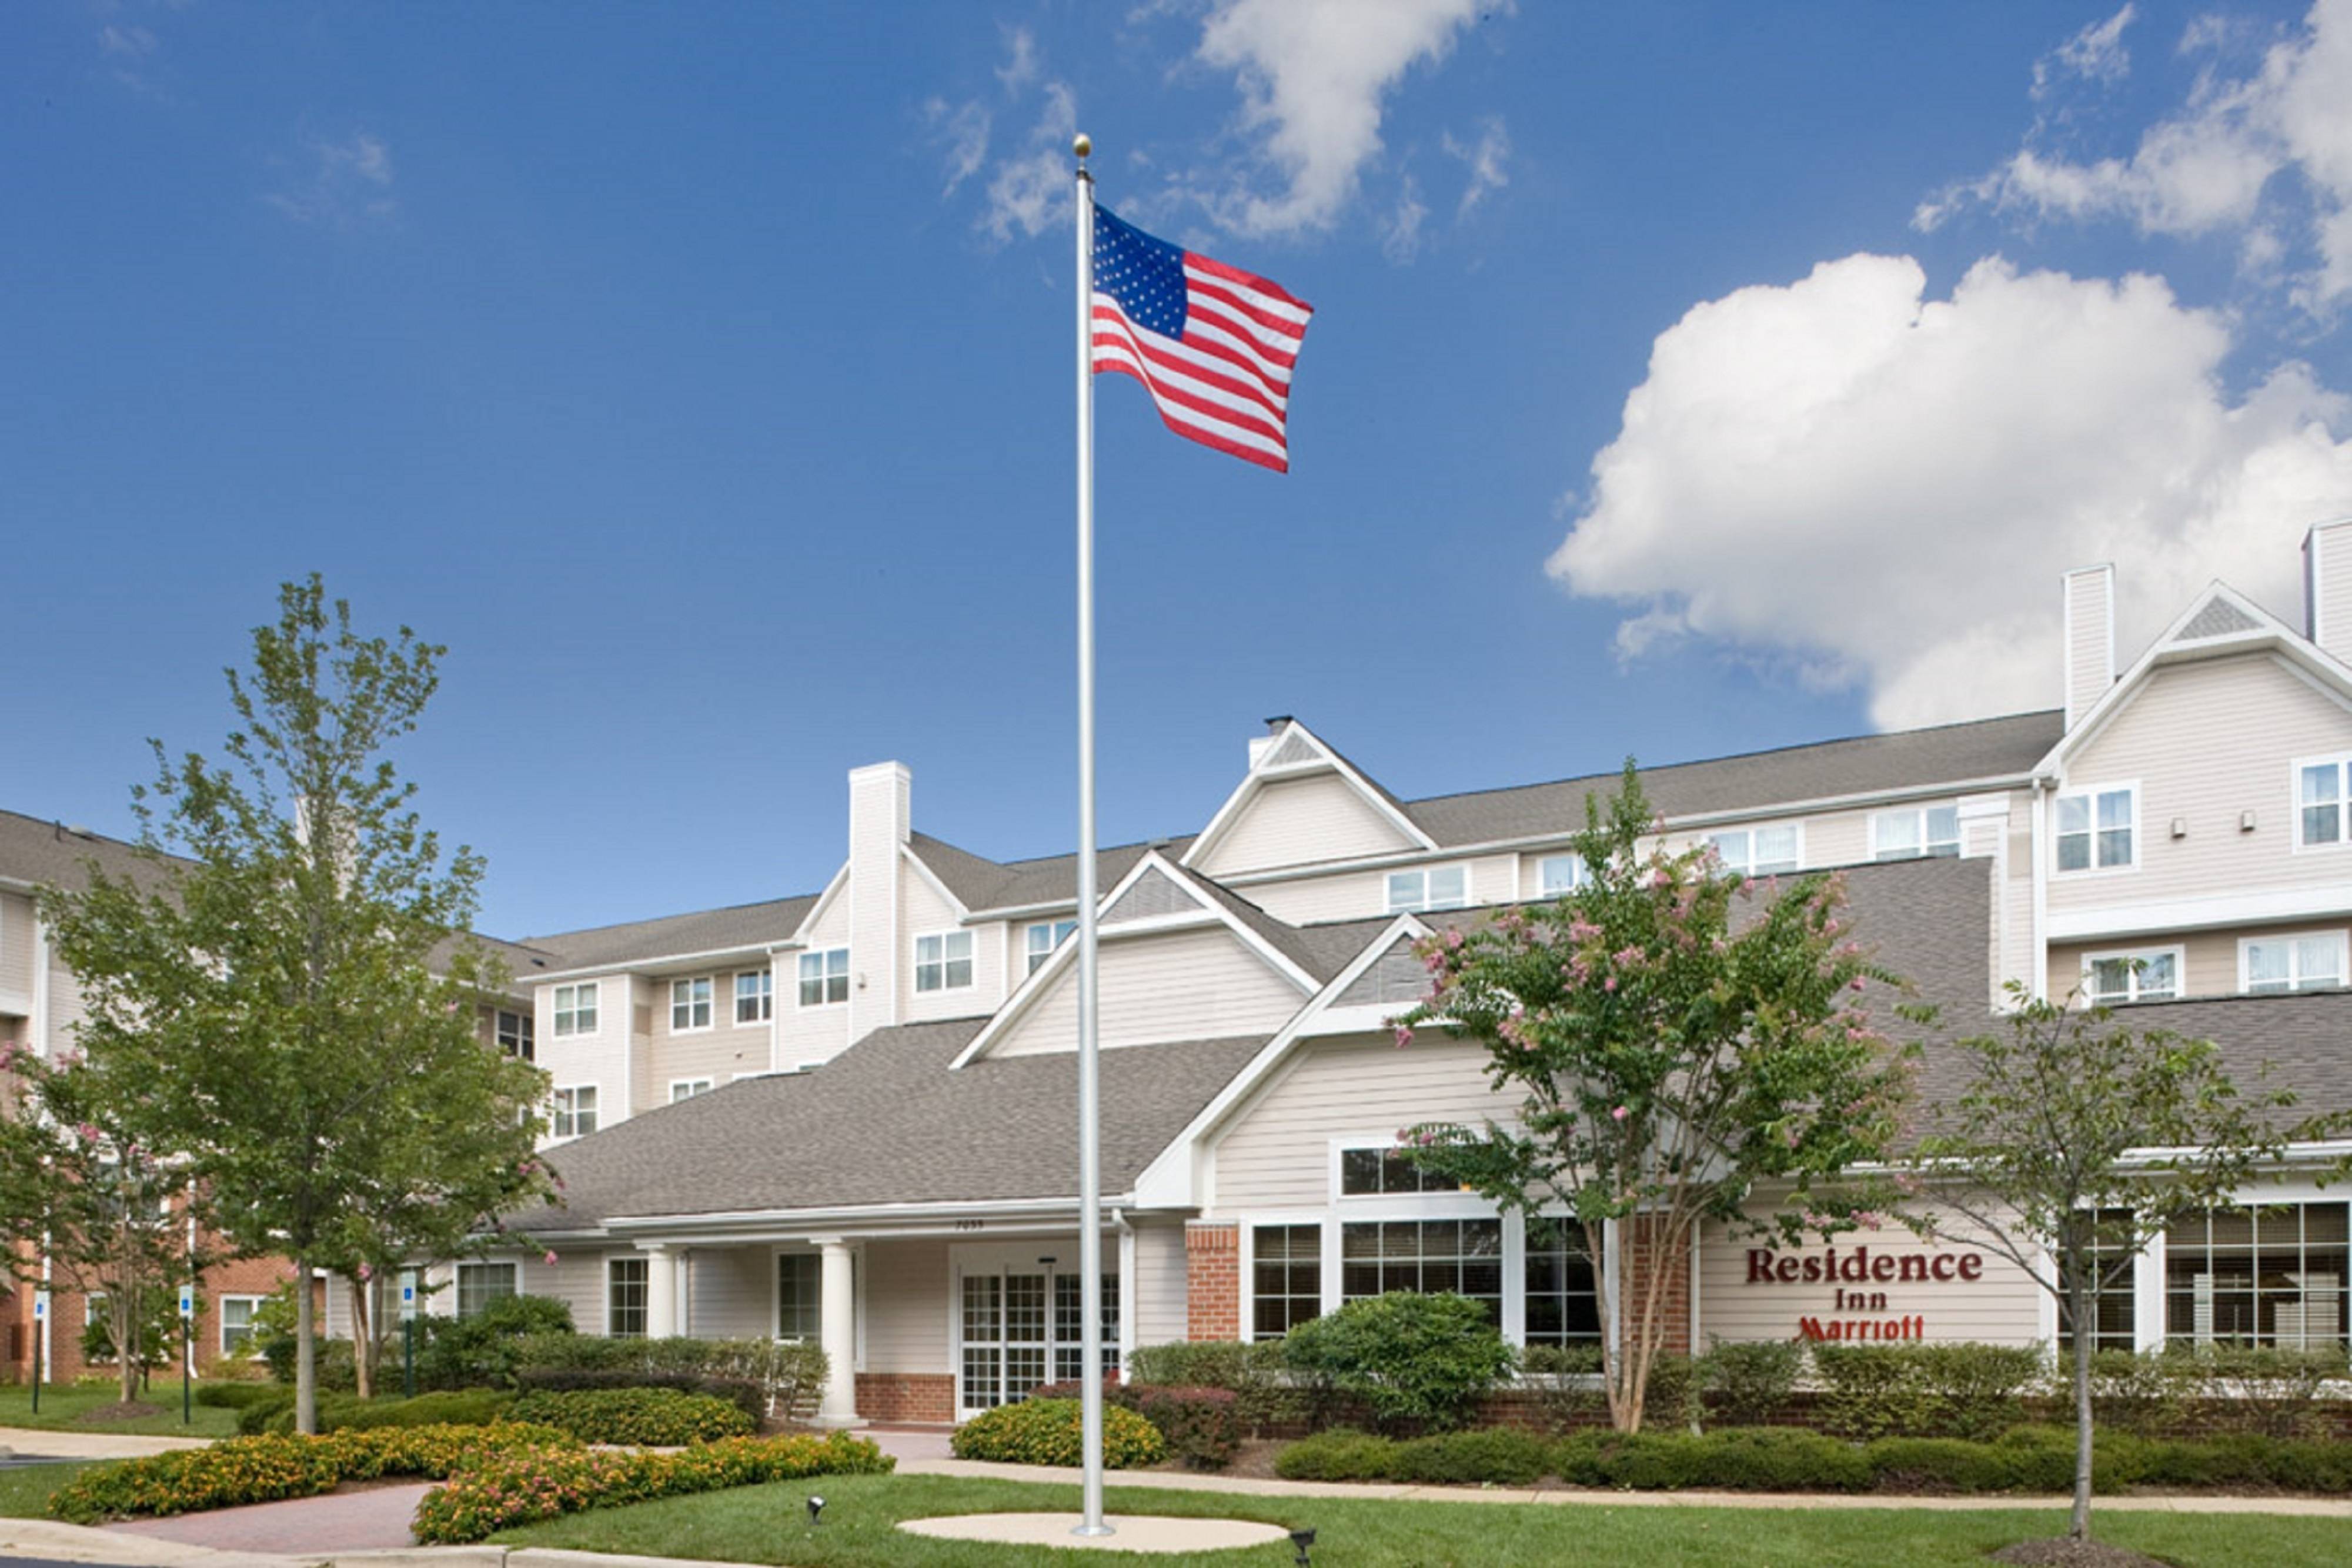 Photo of Residence Inn by Marriott Arundel Mills BWI Airport, Hanover, MD